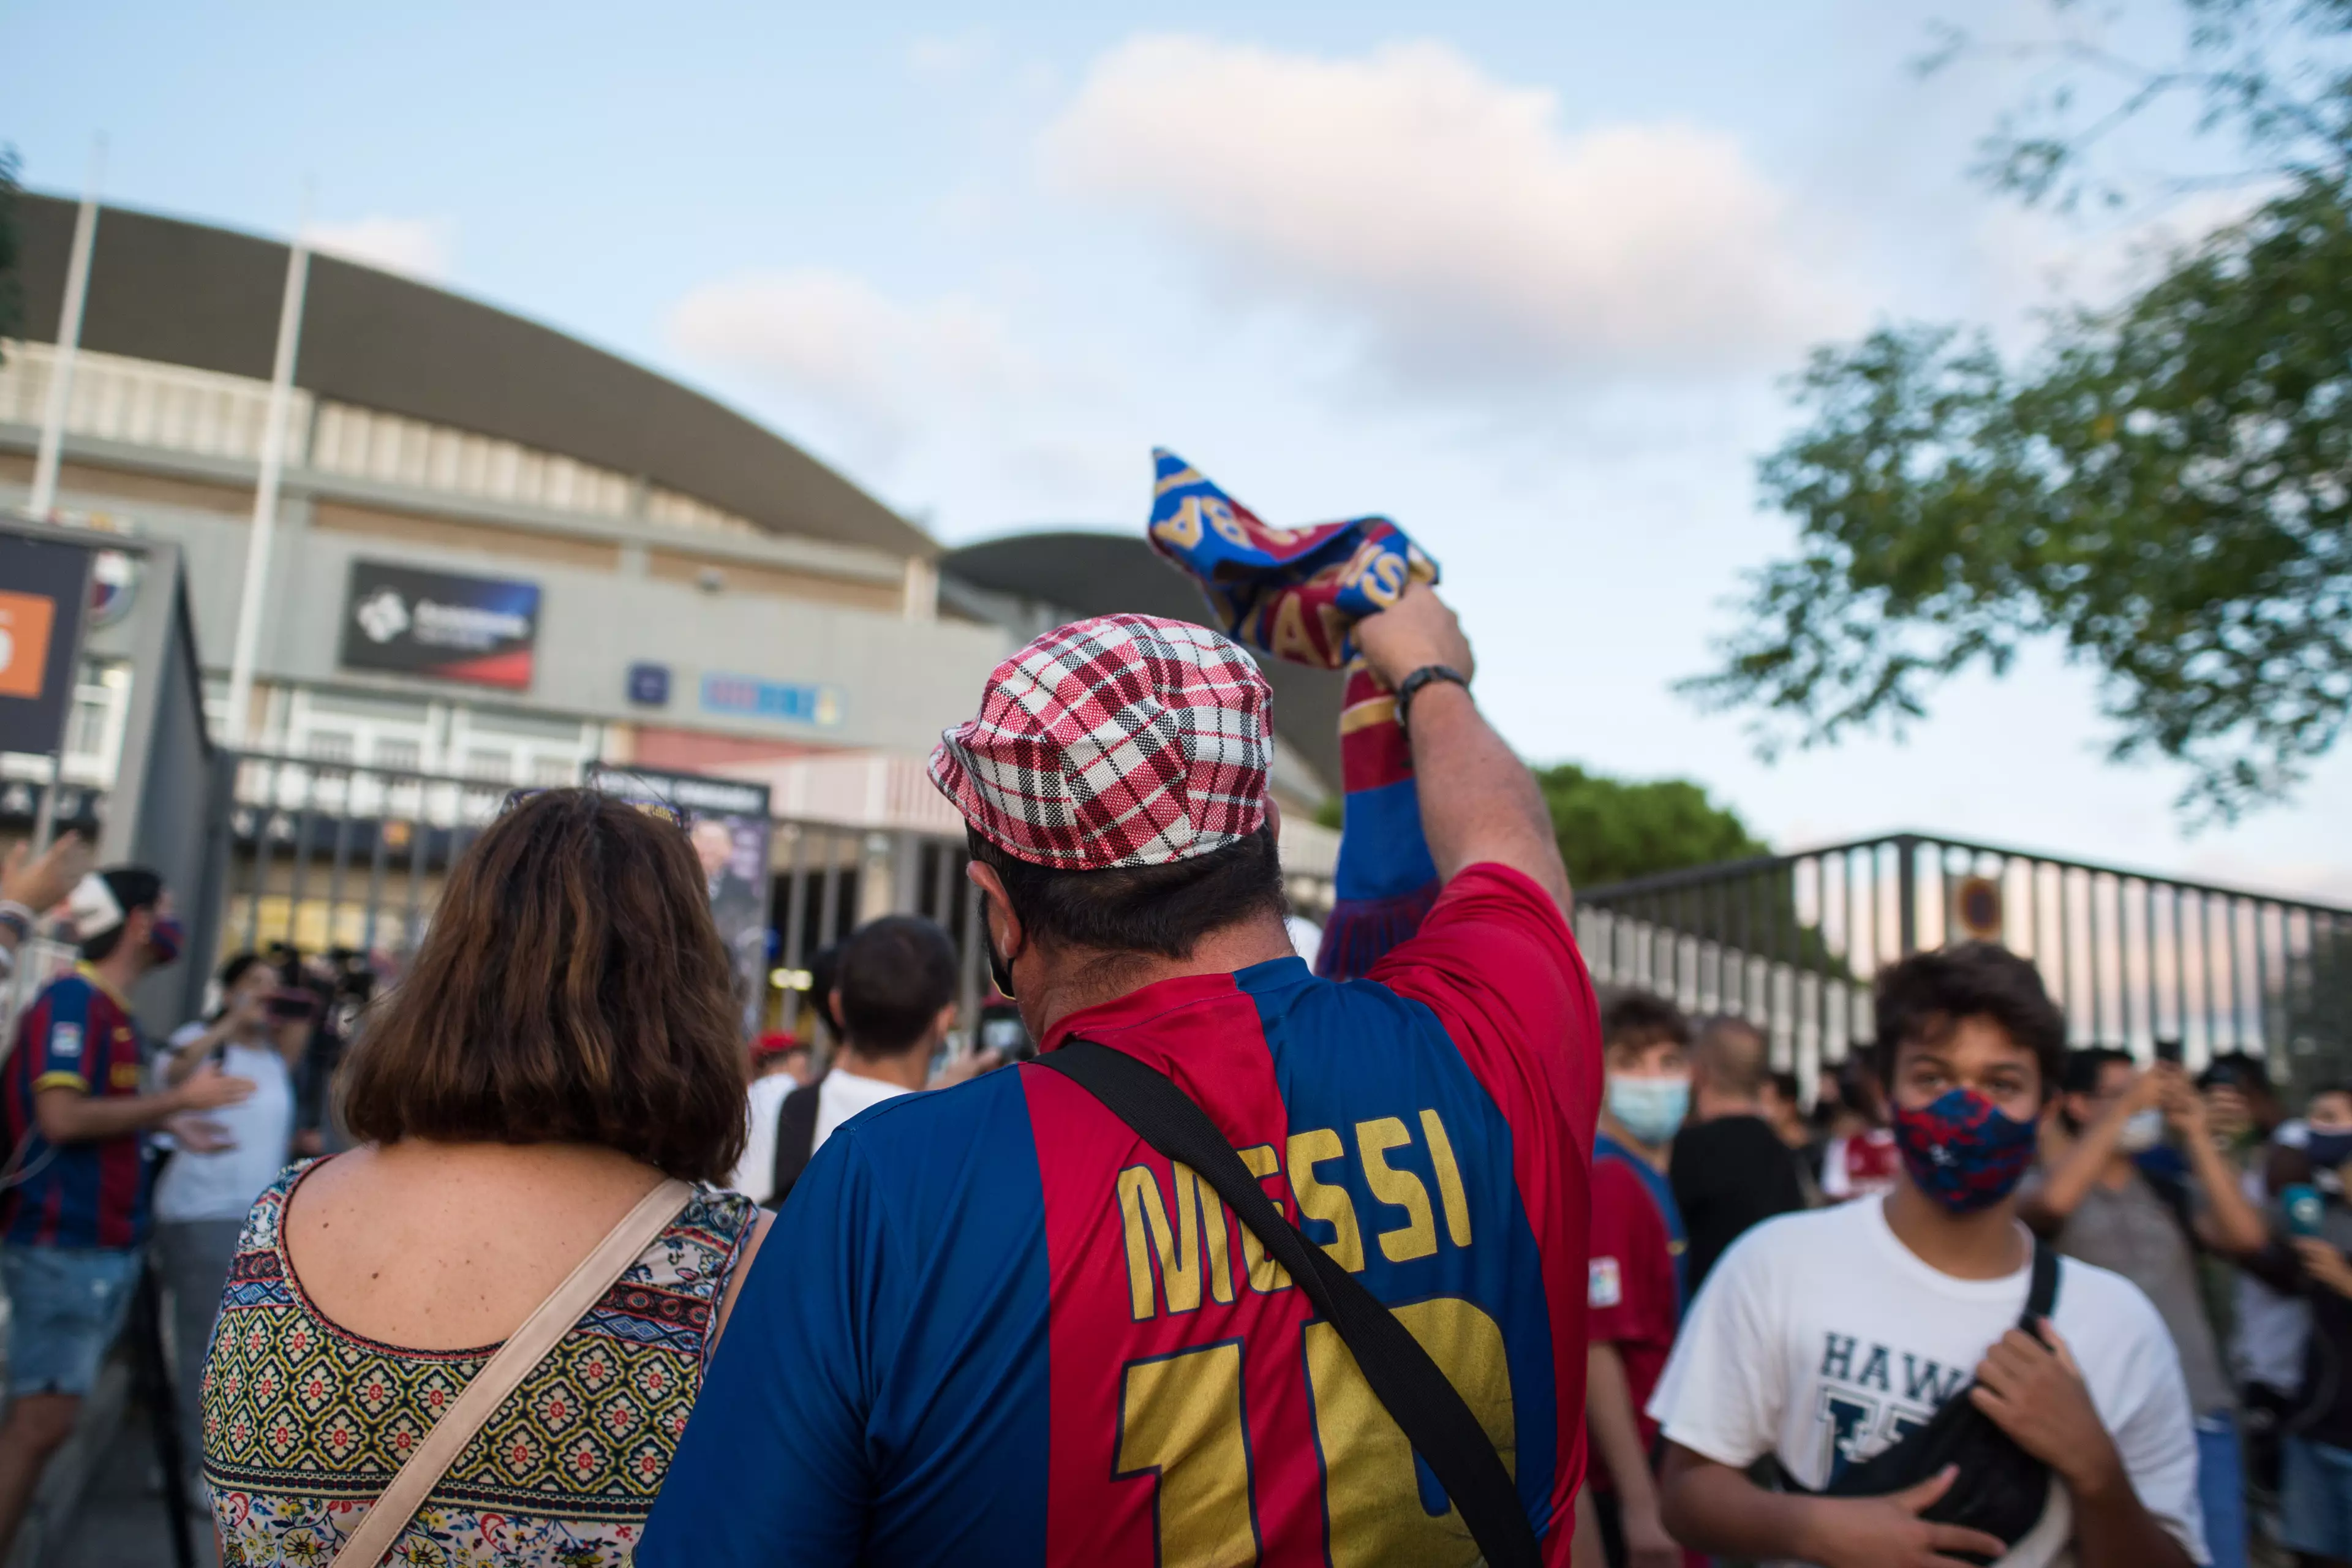 A protester wearing a Messi t-shirt during the demonstration outside the Camp Nou. Image: PA